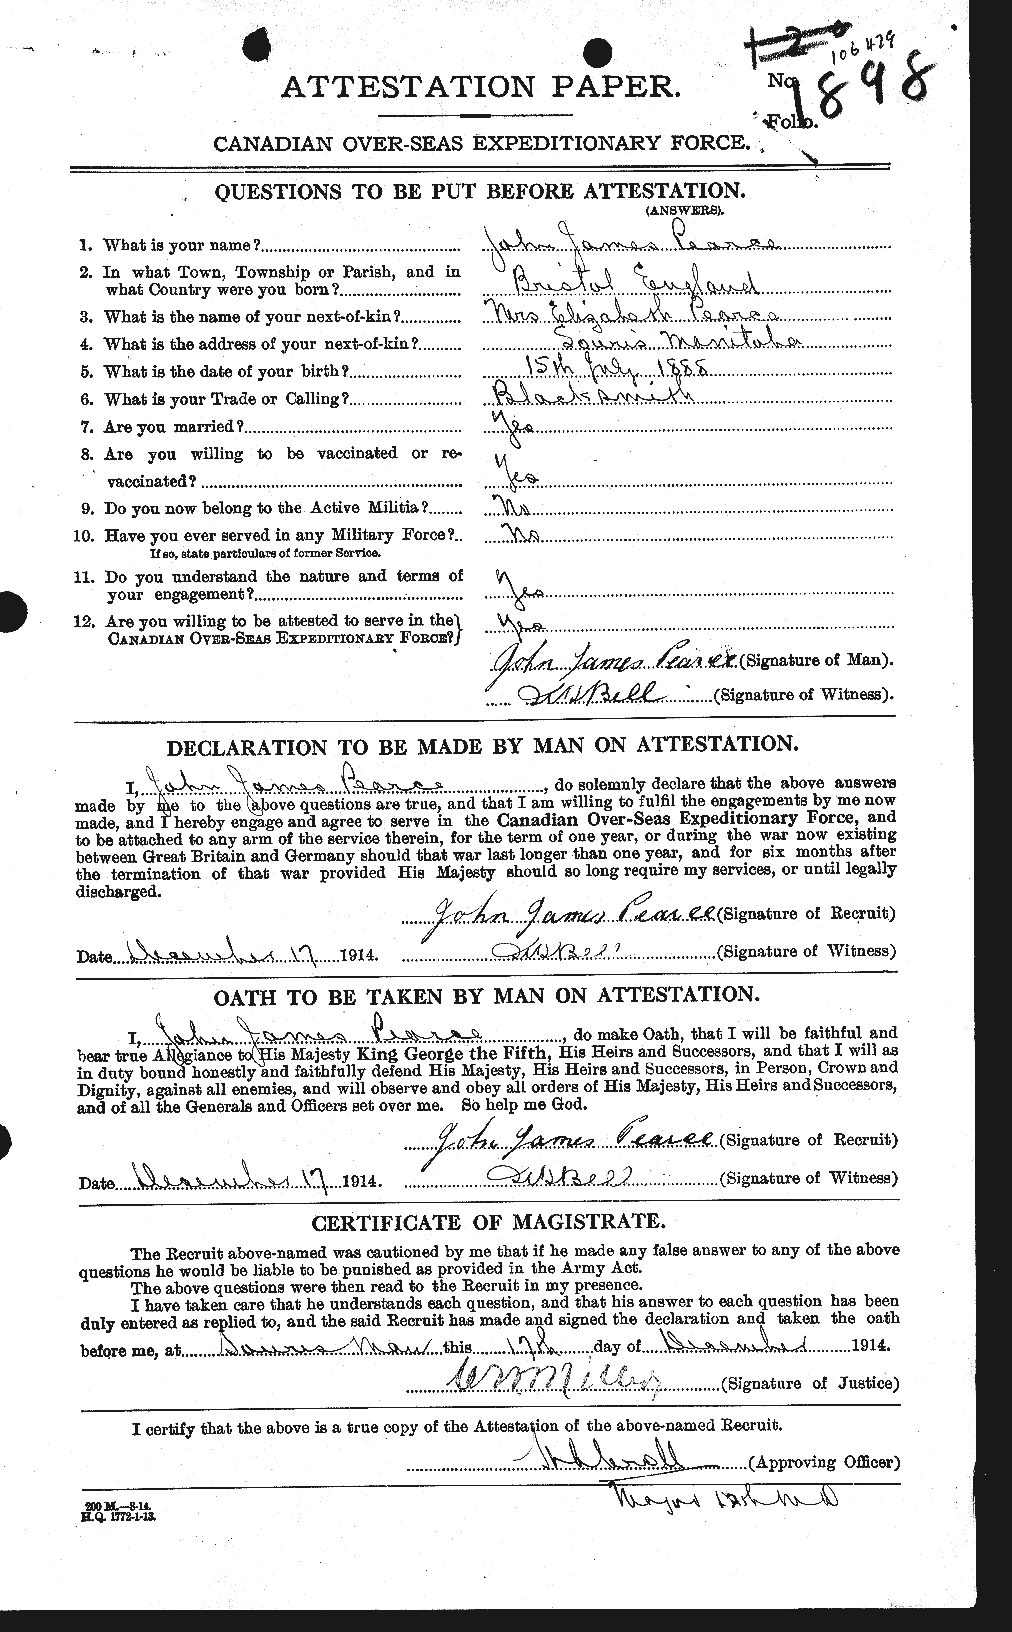 Personnel Records of the First World War - CEF 570700a